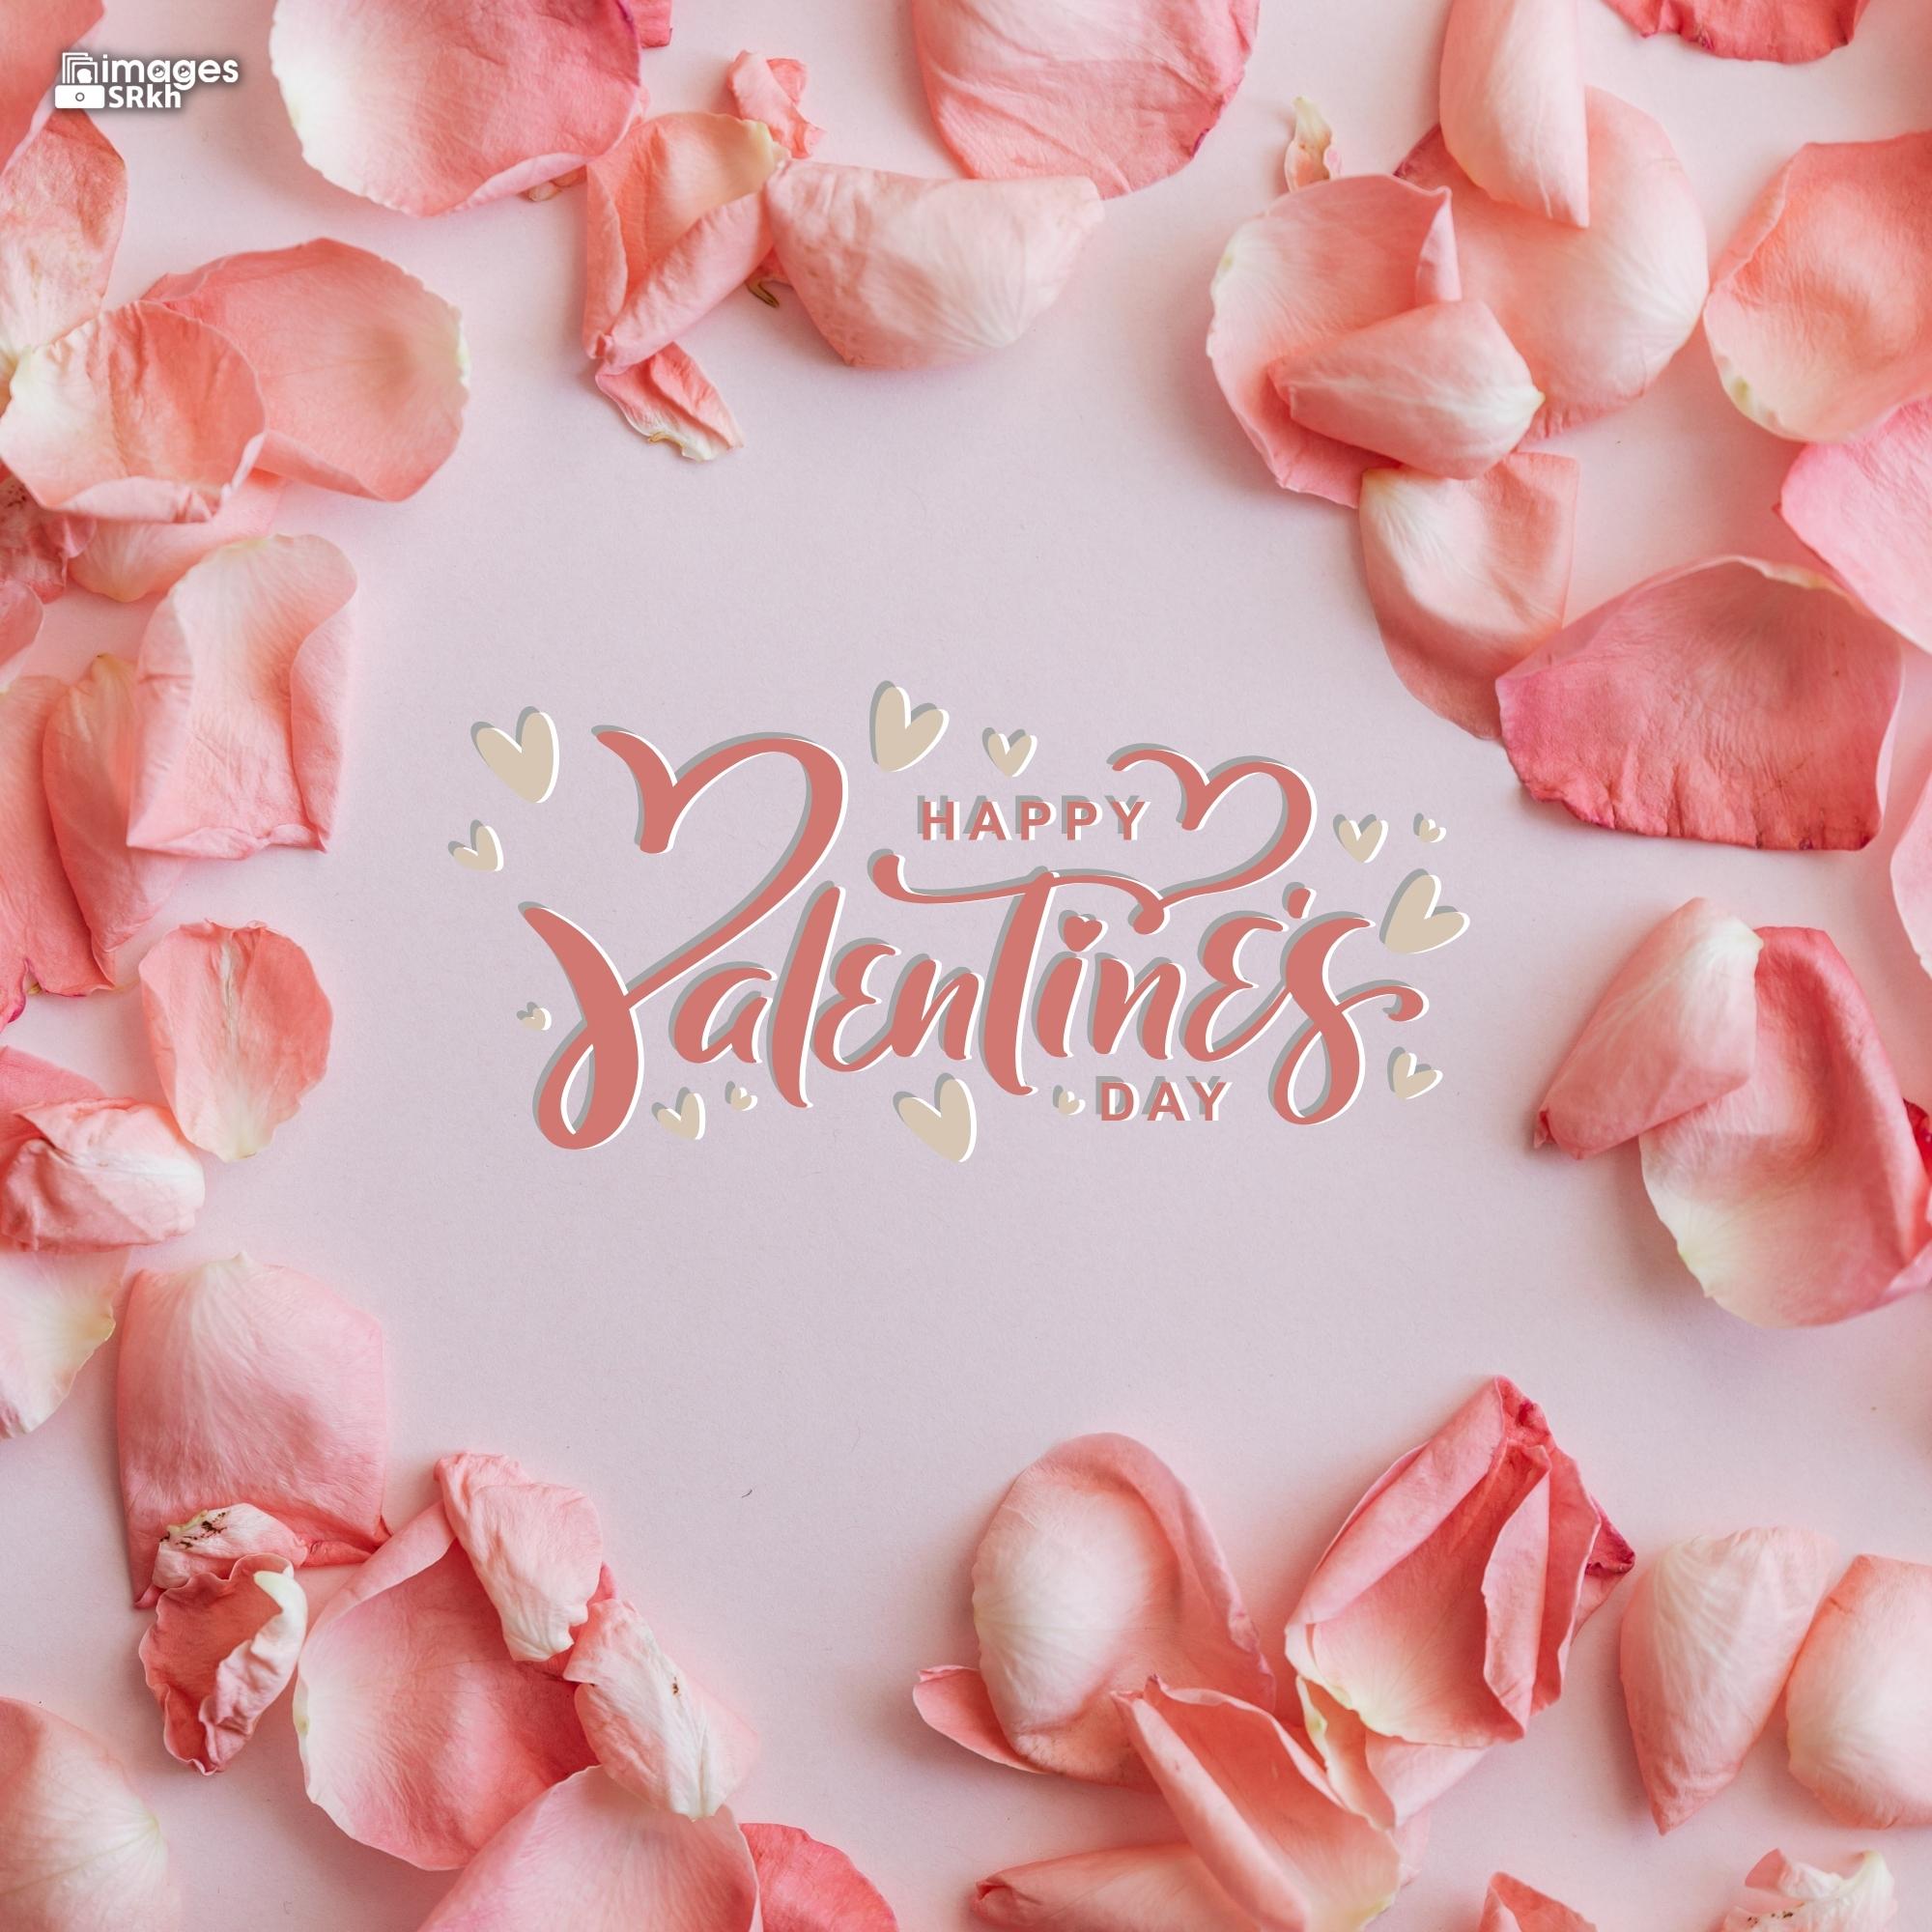 Happy Valentines Day | 439 | PREMIUM IMAGES | Wishes for Love